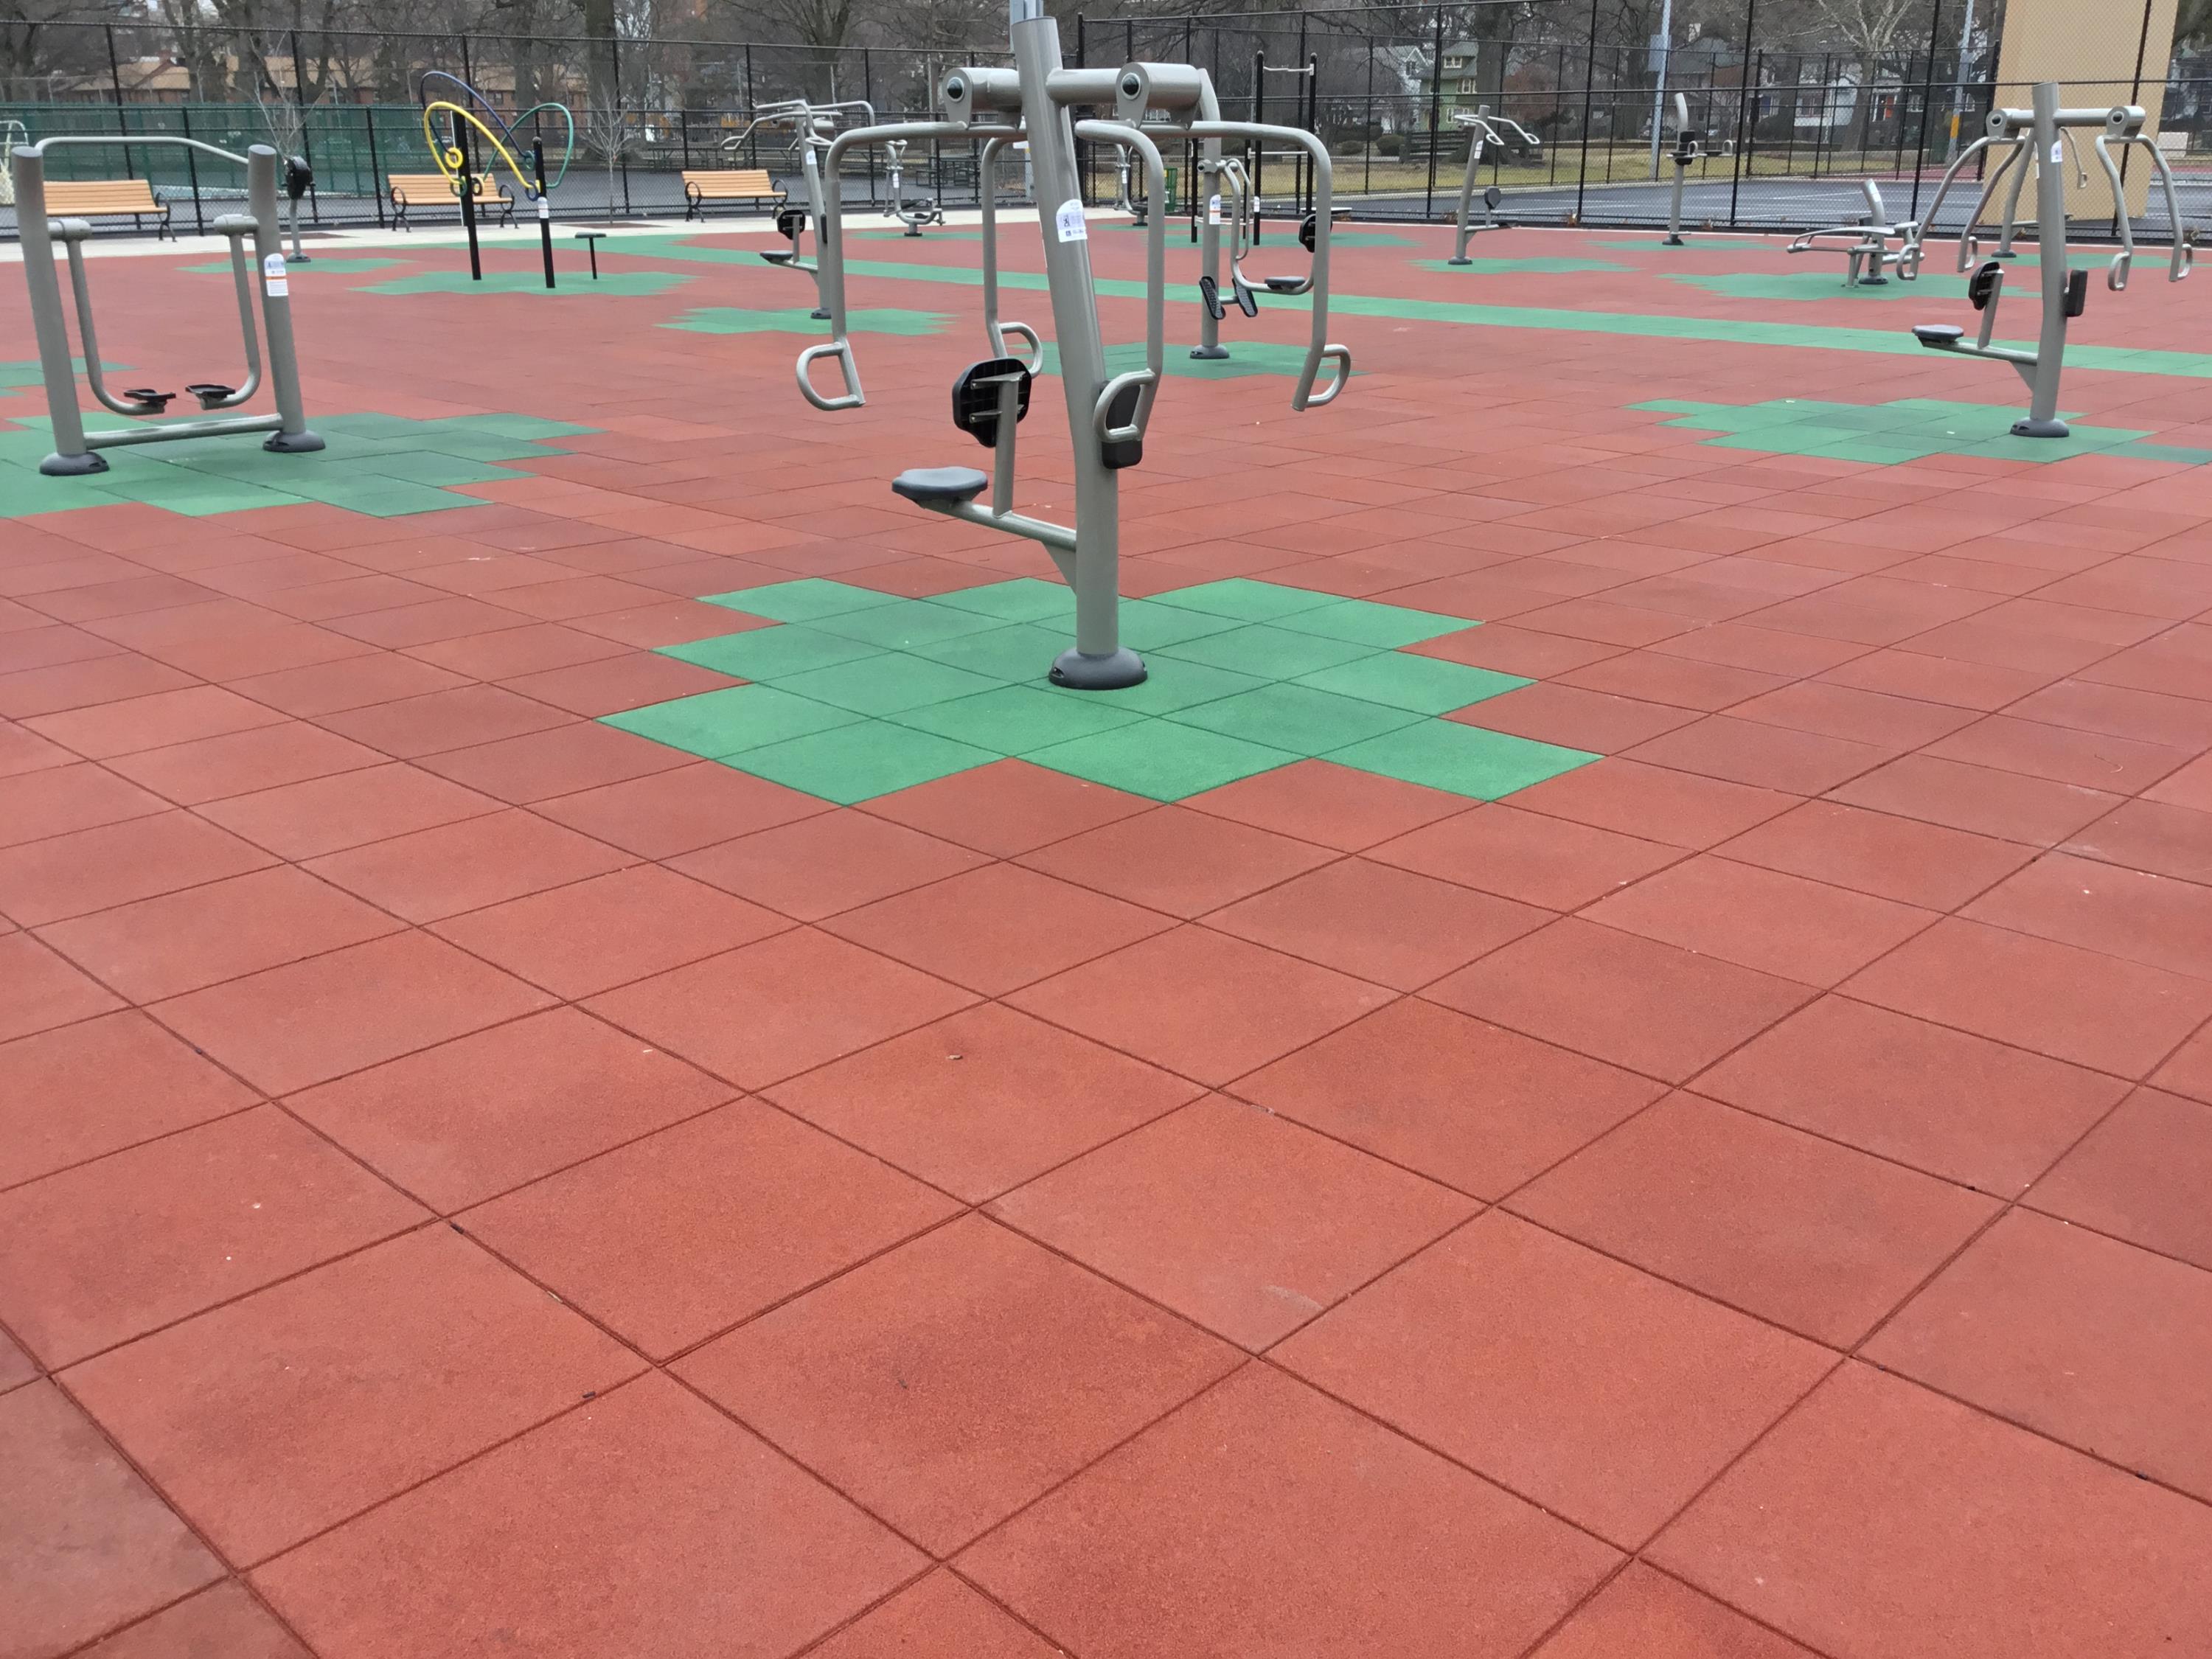 Pigmented Red and Green was selected for the exterior fitness area